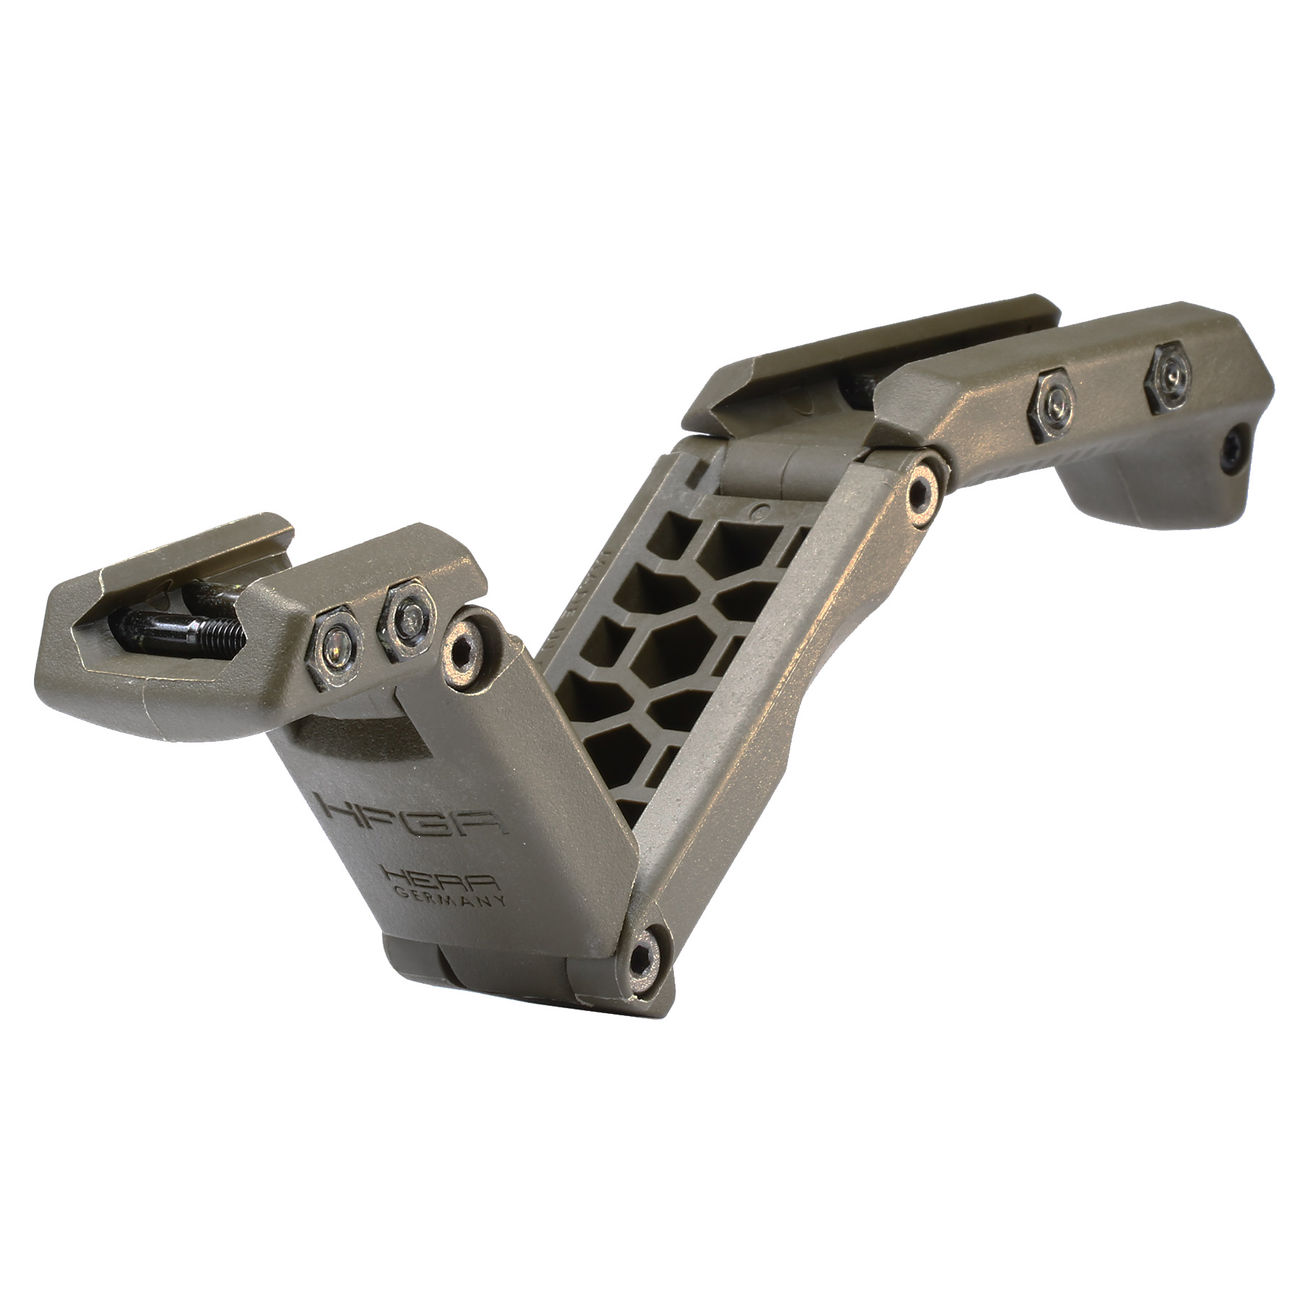 ASG Hera Arms HFGA Multi-Position Polymer Frontgriff oliv Bild 1